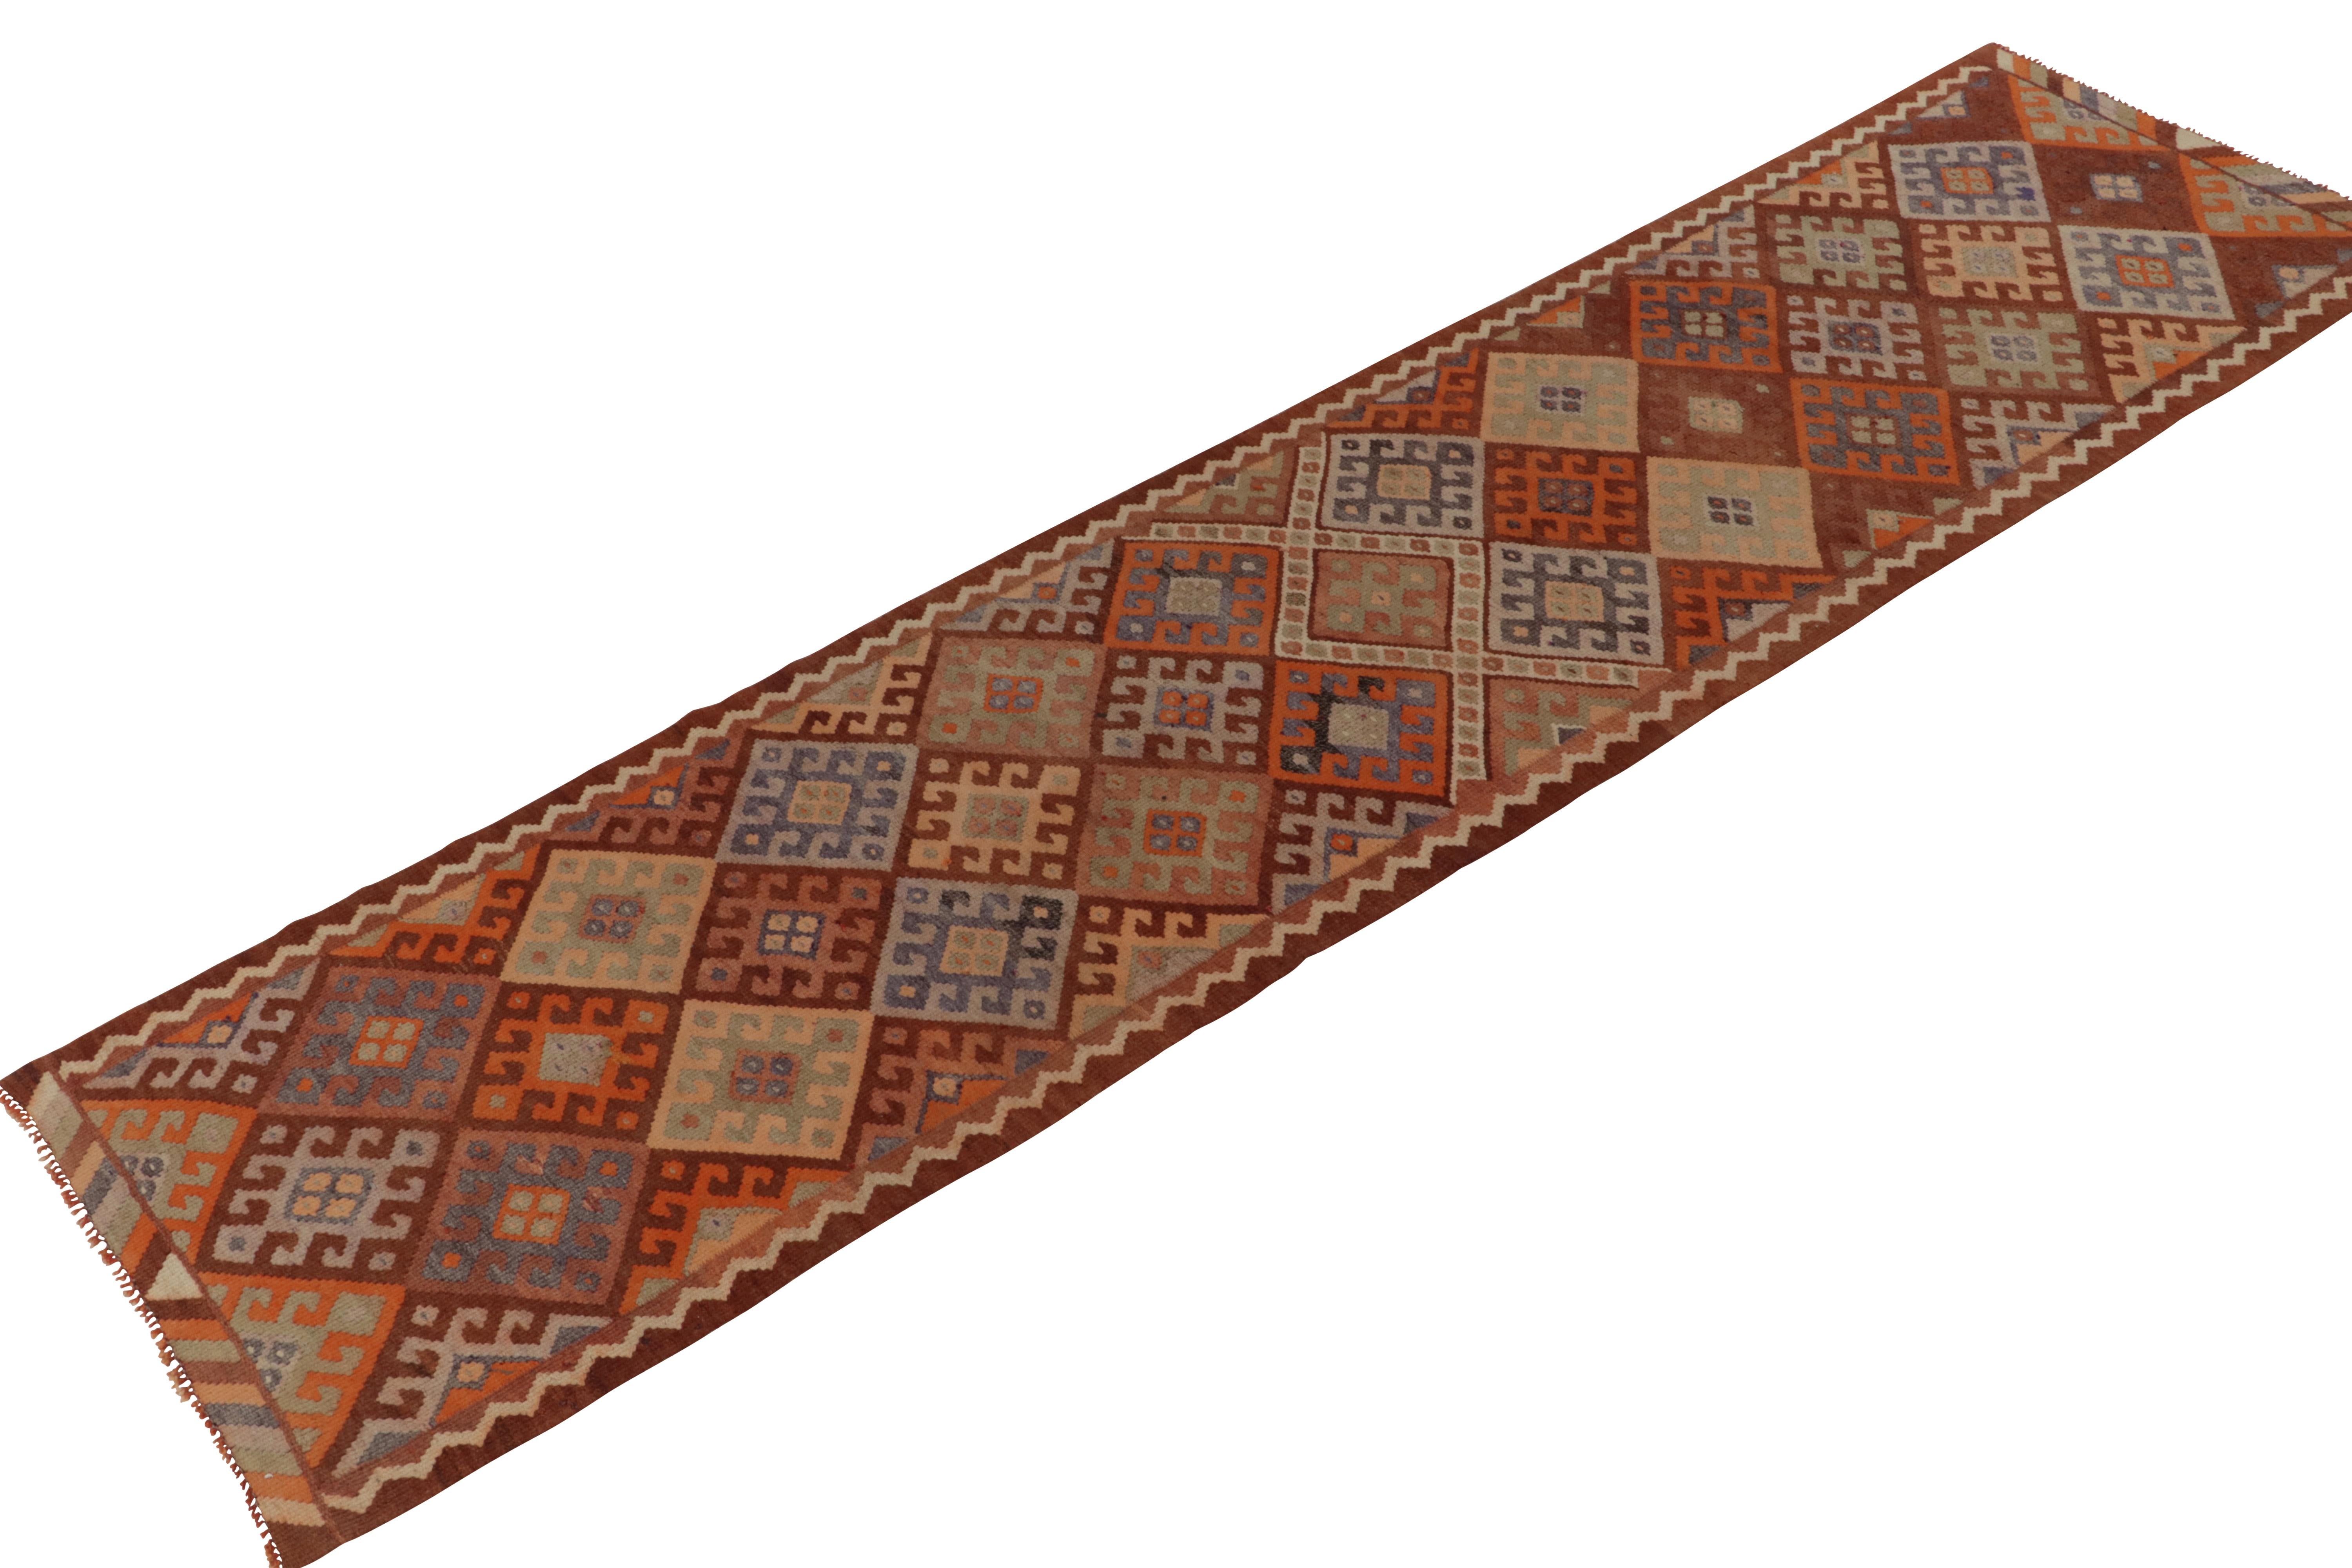 From R&K Principal Josh Nazmiyal’s latest acquisitions, a distinct vintage kilim runner originating from Turkey circa 1950-1960. 

On the Design: Tribal geometric motifs with latch hook extensions enjoy exceptional movement in the warmth &